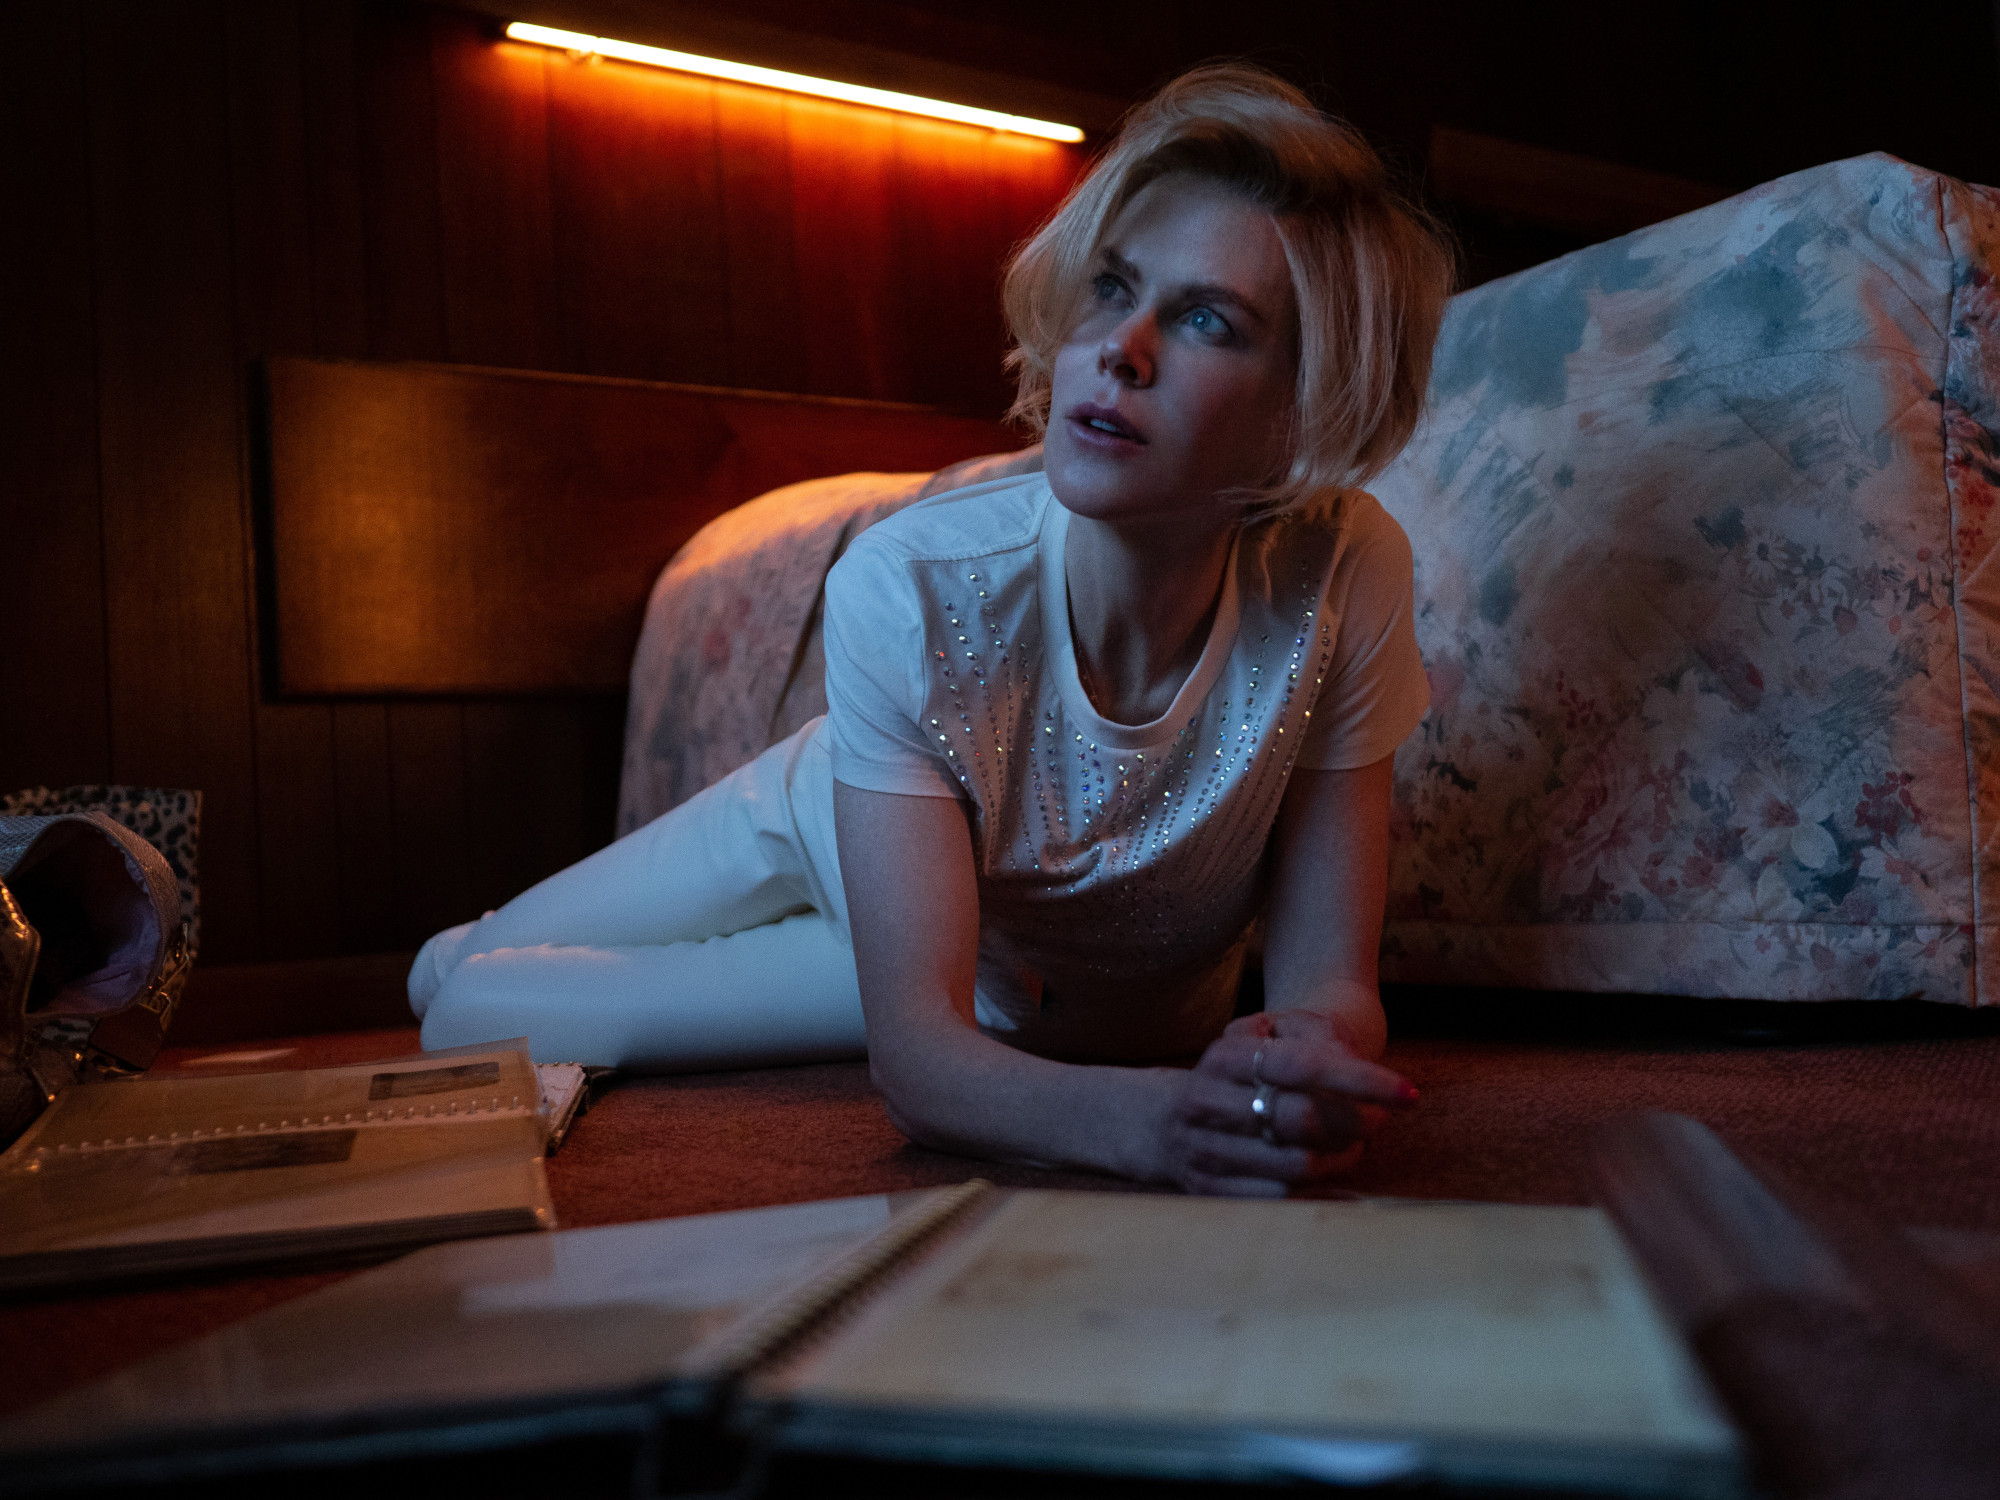 Nicole Kidman in 'Roar' Episode 2 on Apple TV+. She's lying on the floor with a photo album in front of her.